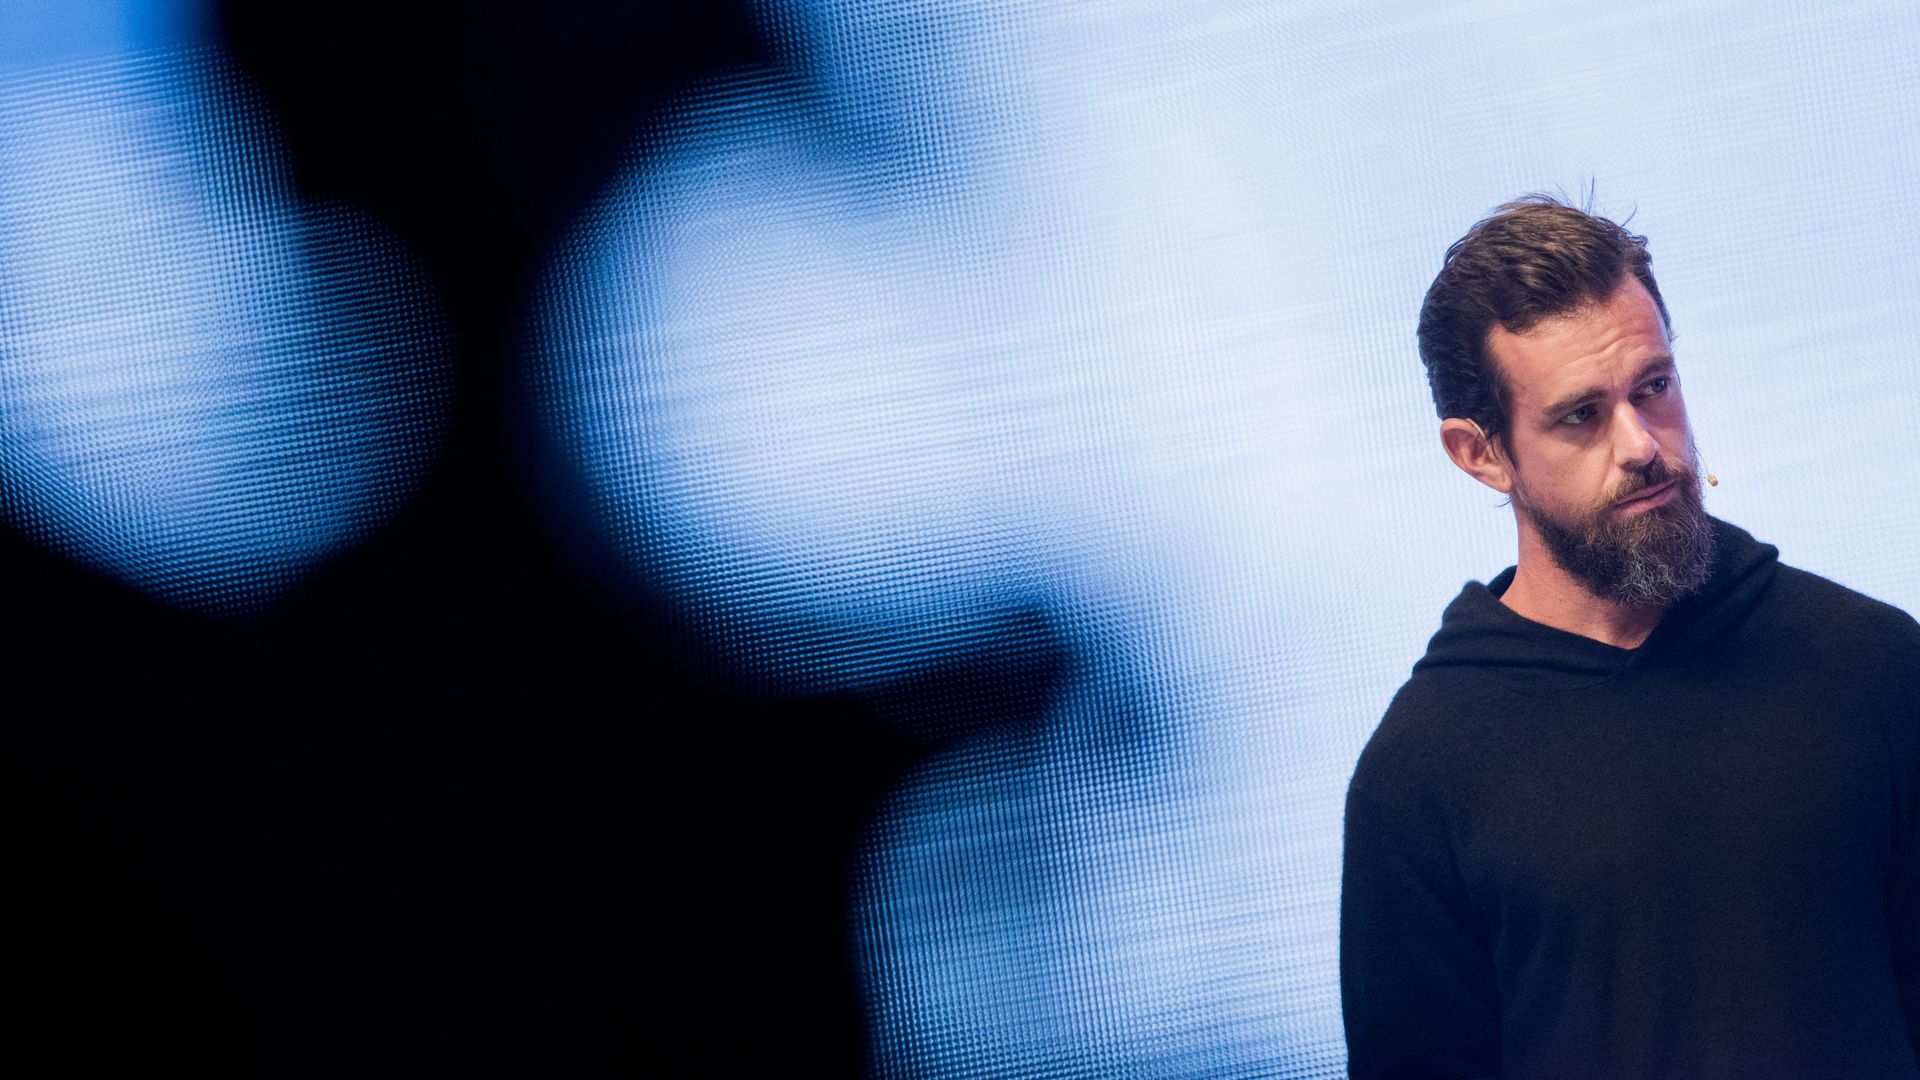 Jack Dorsey, Co-founder and CEO of Twitter. Photo: Rolf Vennenbernd/picture alliance via Getty Images